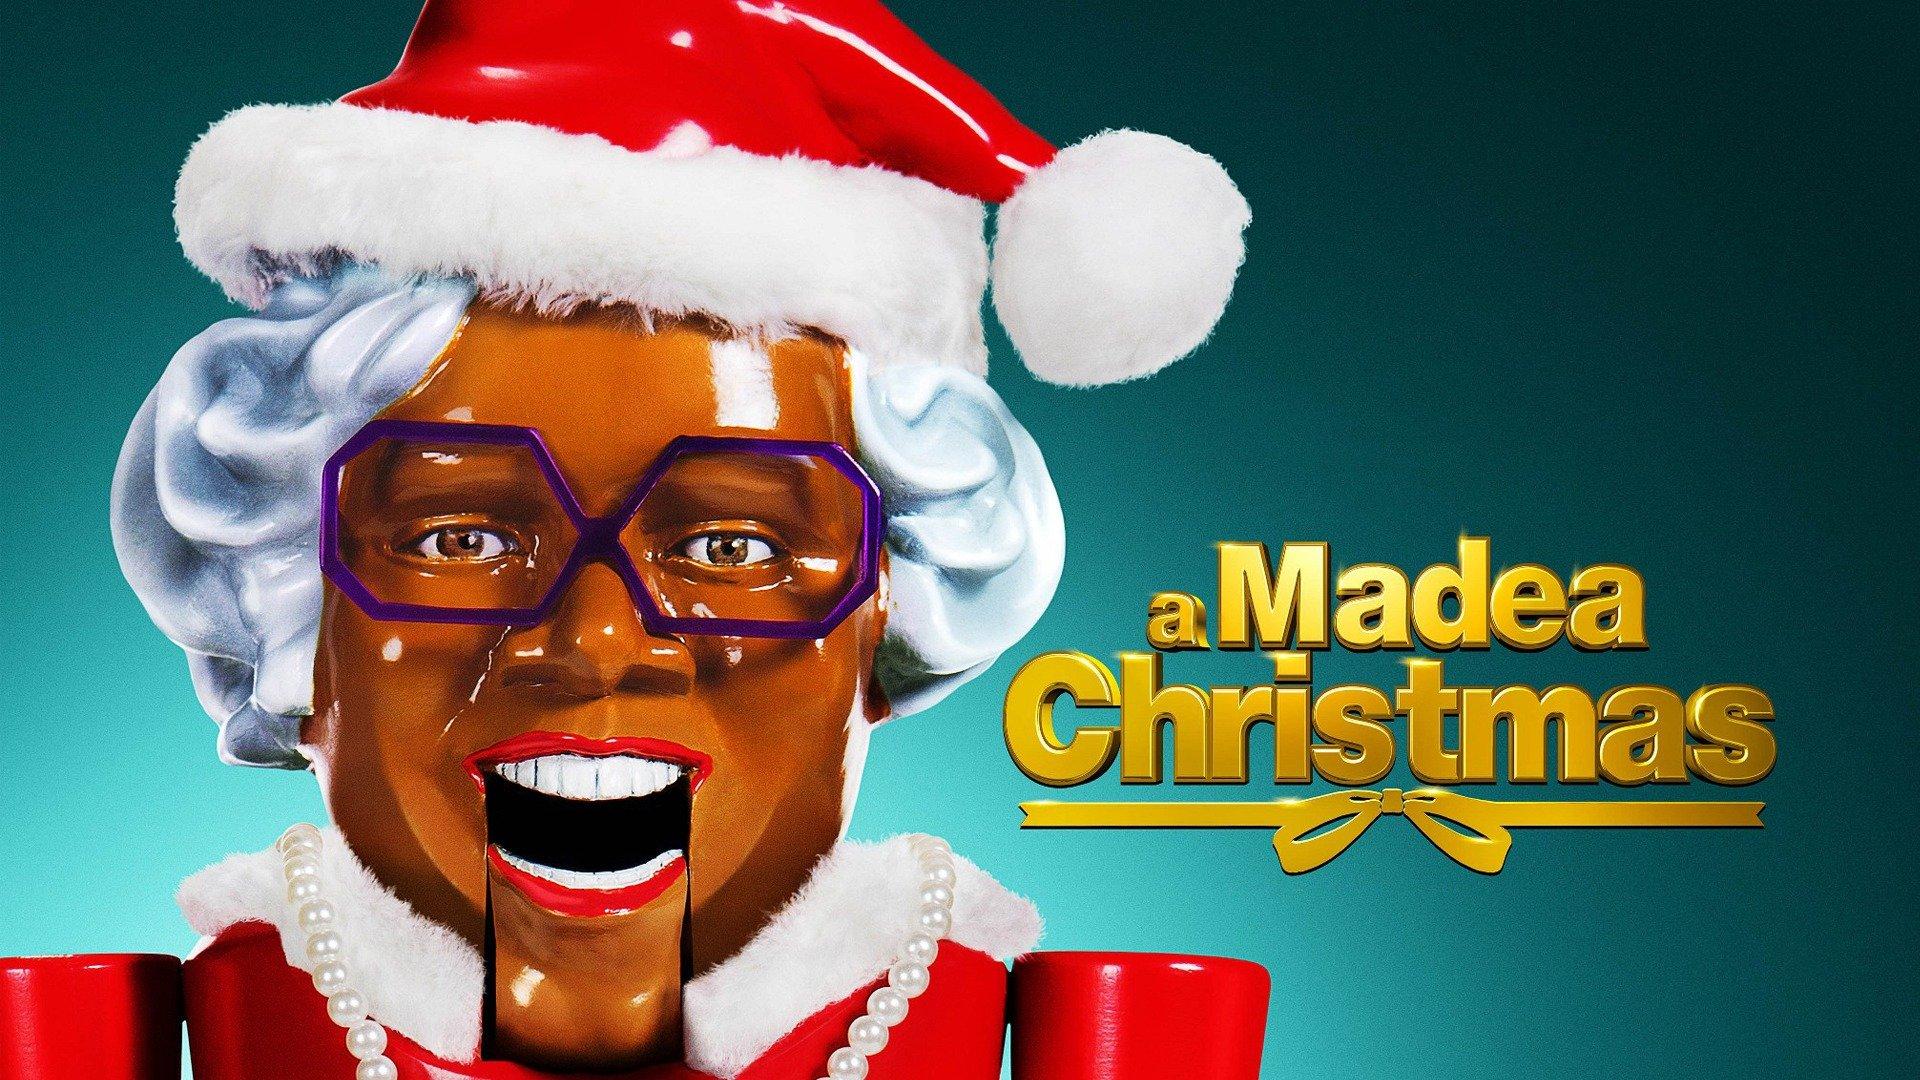 Watch A Madea Christmas Streaming Online on Philo (Free Trial)